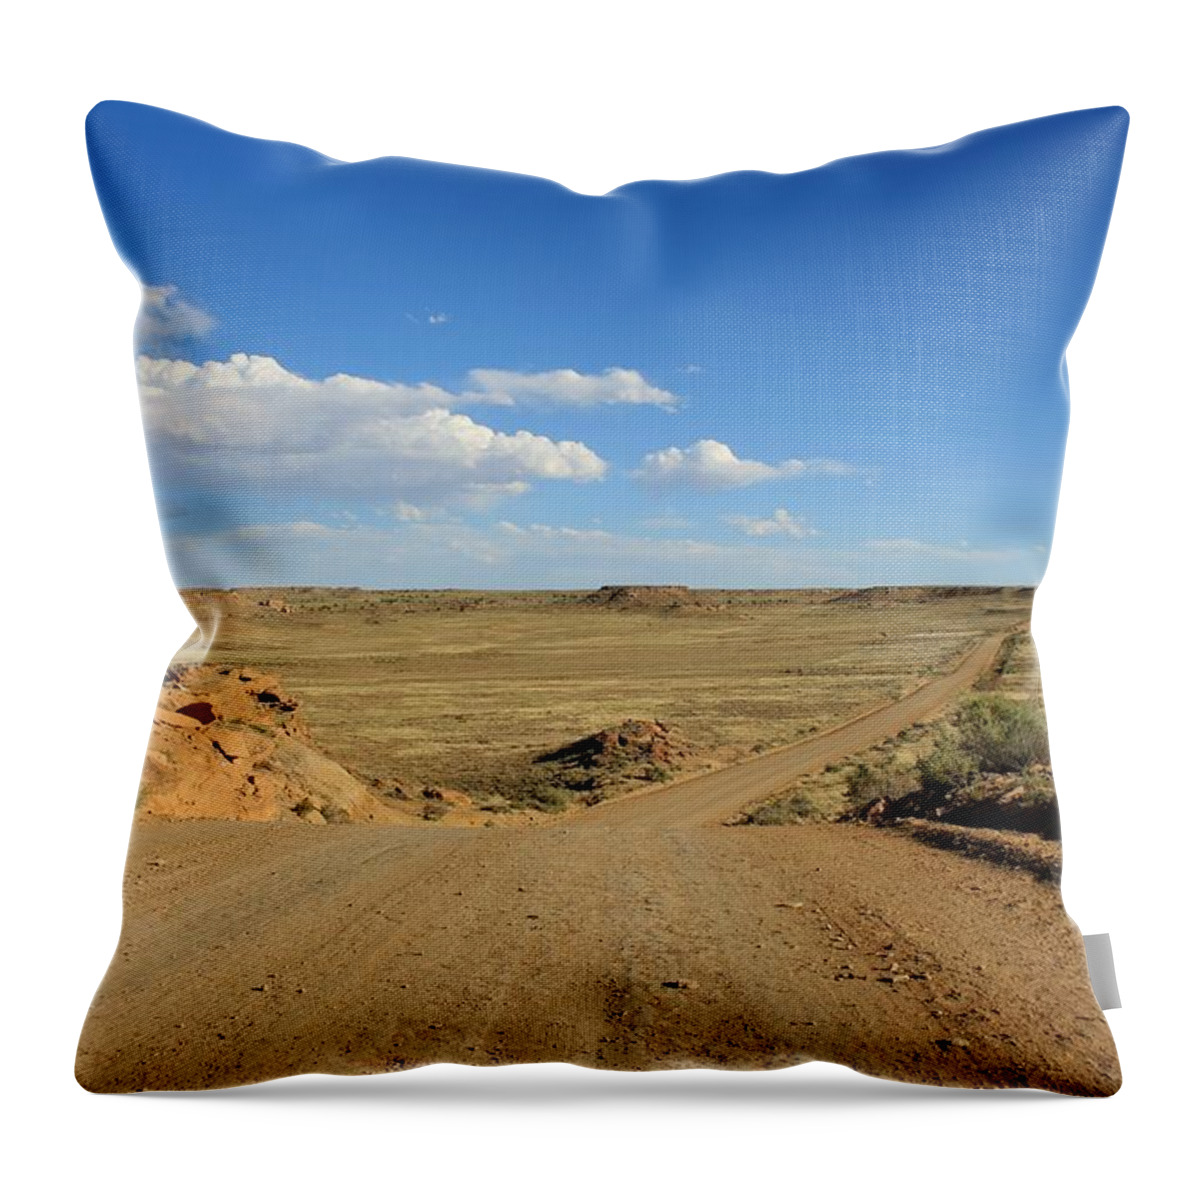 The Throw Pillow featuring the photograph The Road To Chaco by Elizabeth Sullivan